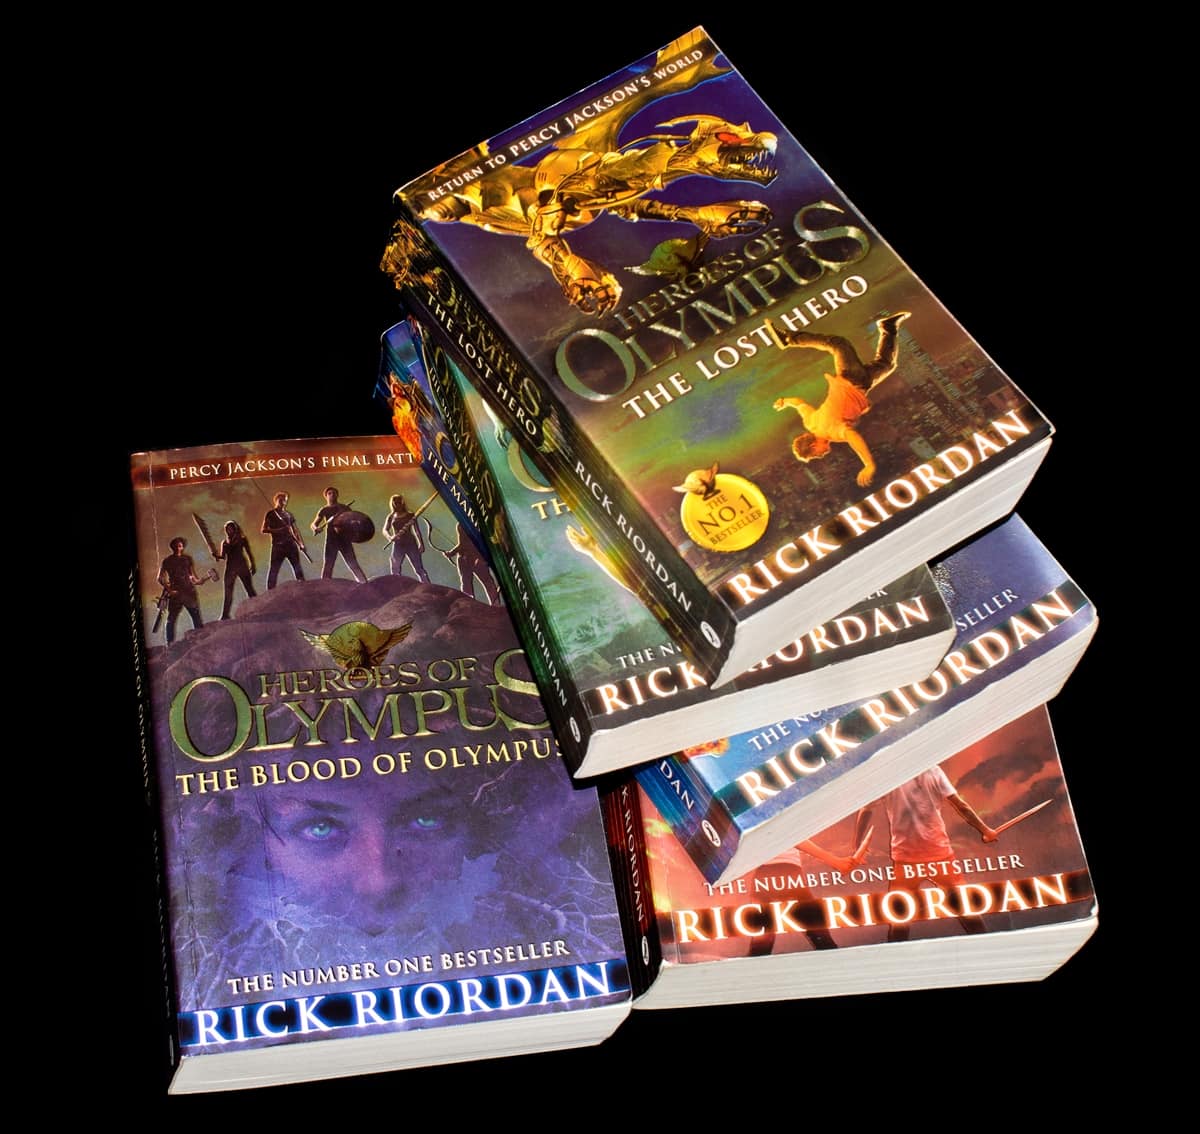 American author Rick Riordan is best known for writing the Percy Jackson & the Olympians series about a twelve-year-old boy who discovers he is a son of Poseidon